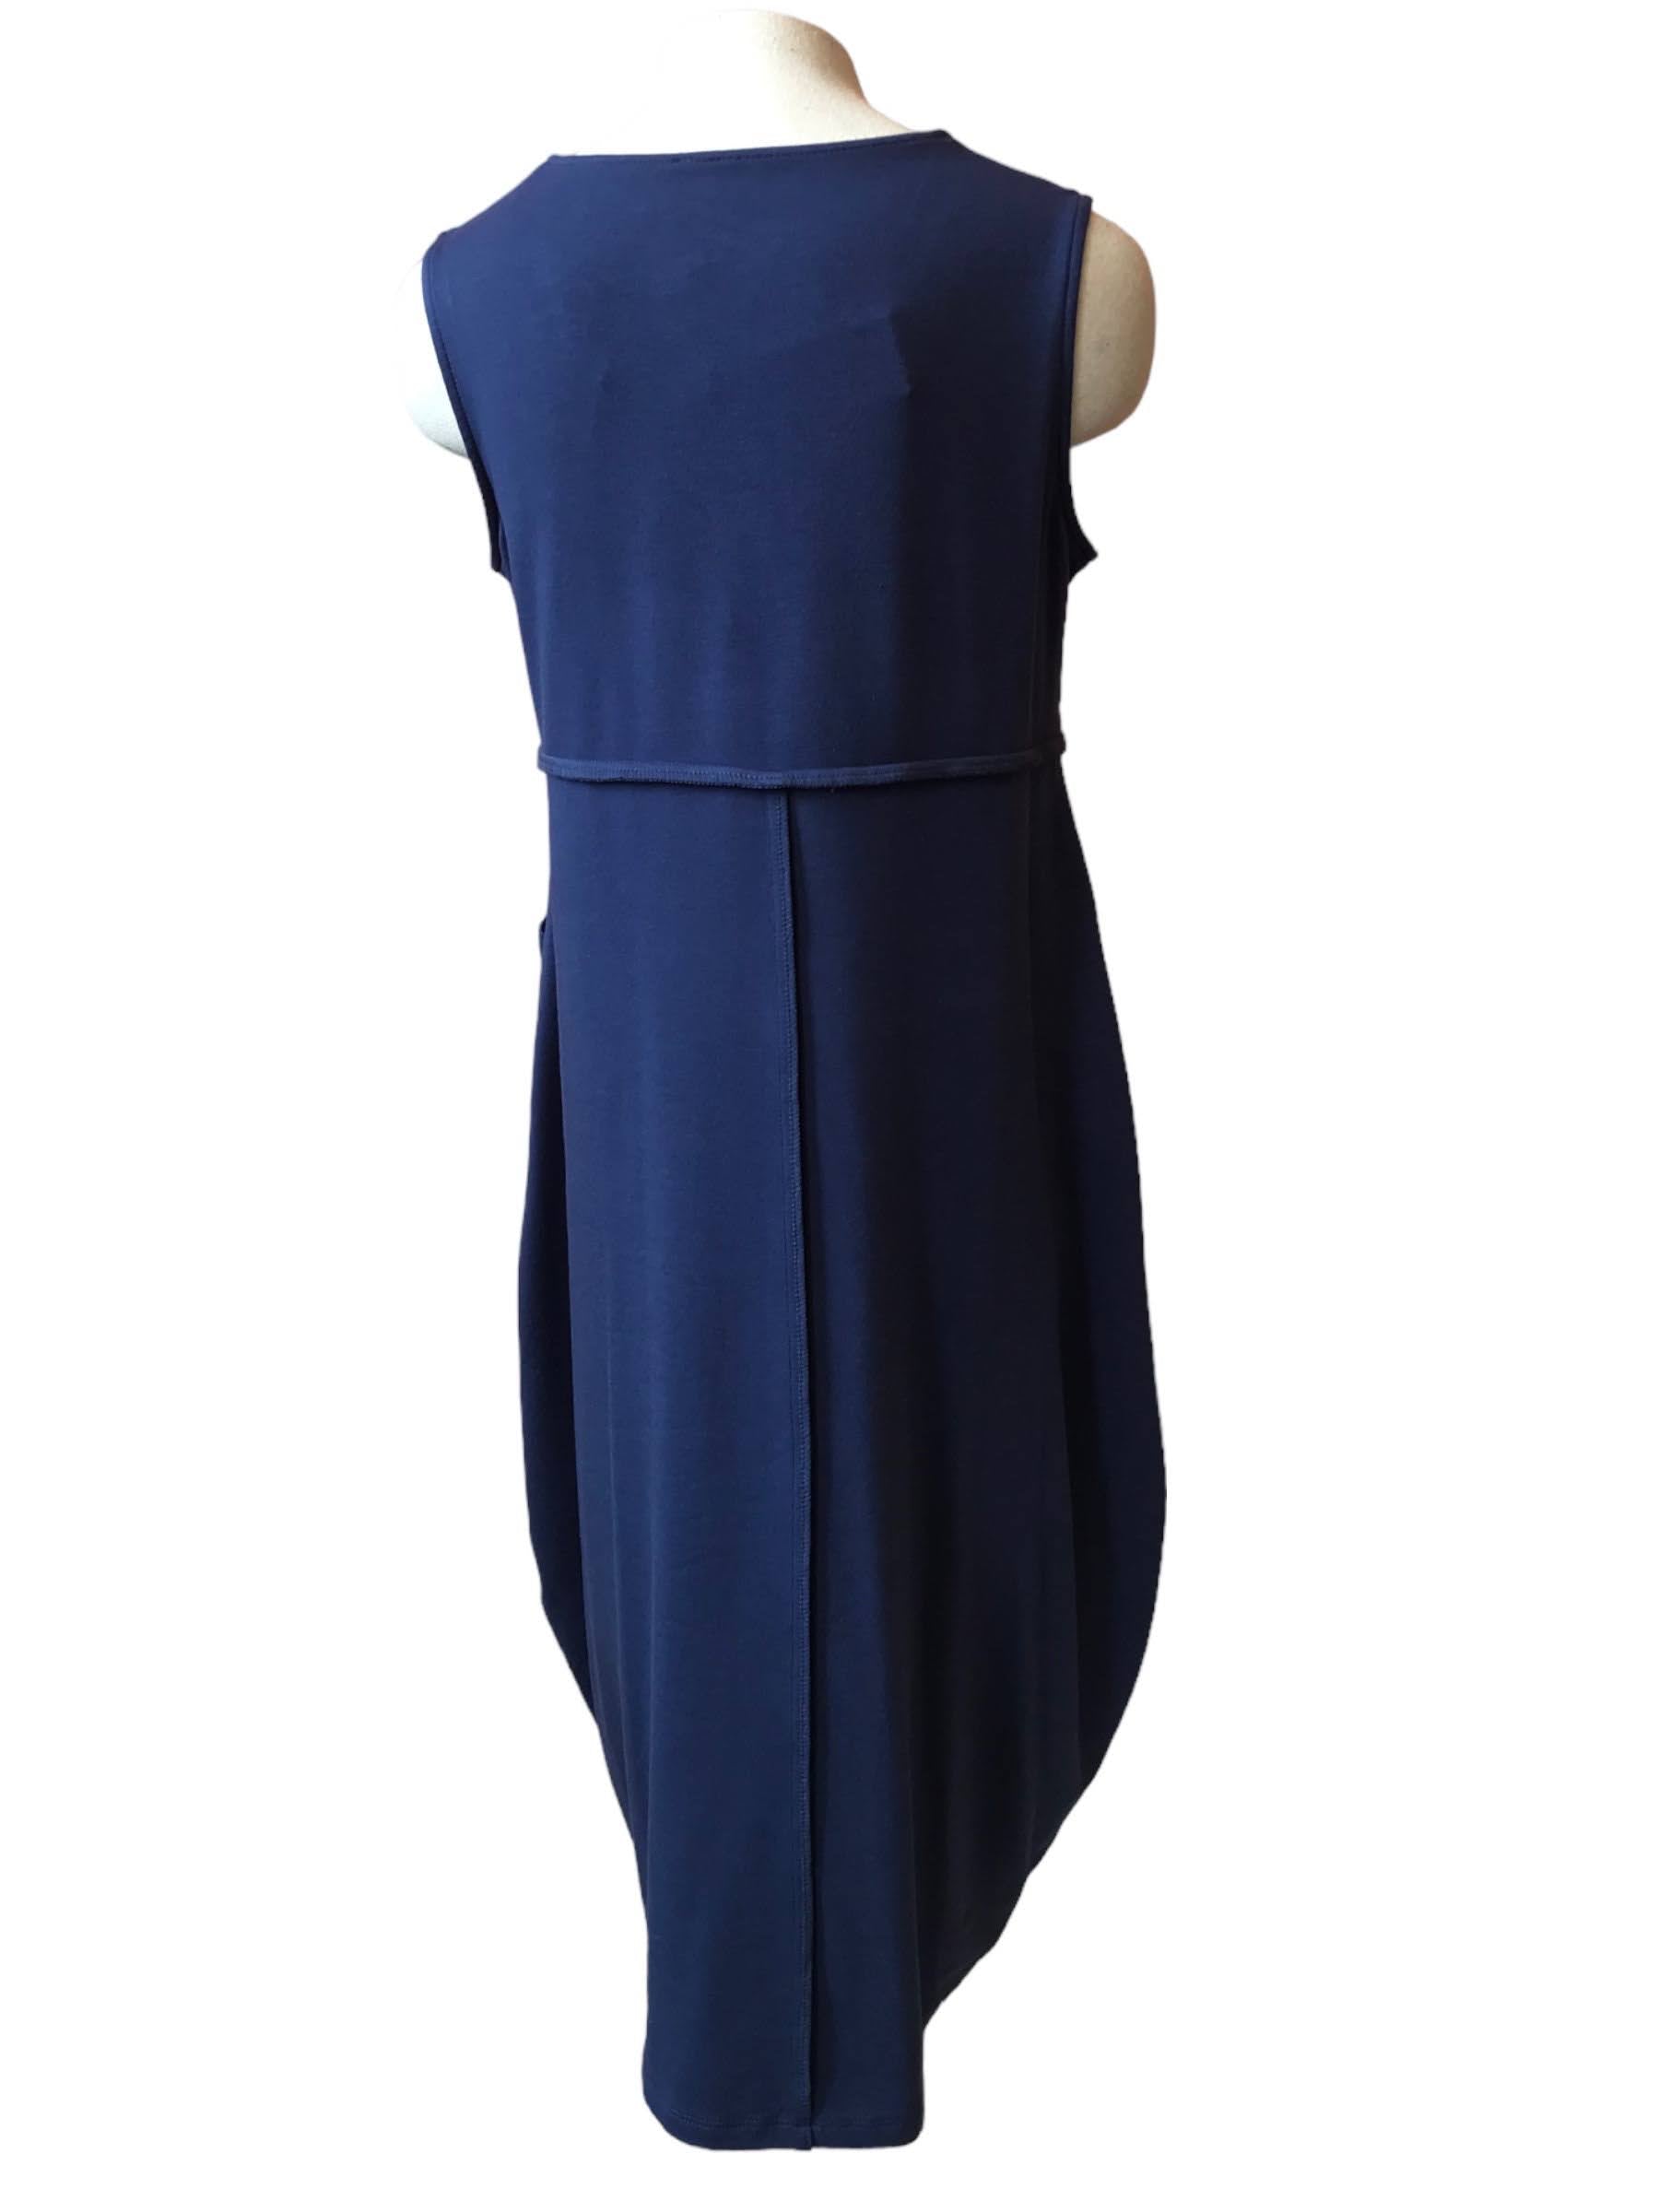 Wanda Dress by Pure Essence, Denim, back view, V-neck, sleeveless, vertical seams, asymmetrical horizontal seams, patch pockets, rounded hem, mid-calf length, eco-fabric, bamboo rayon, cotton, sizes XS to XXL, made in Canada